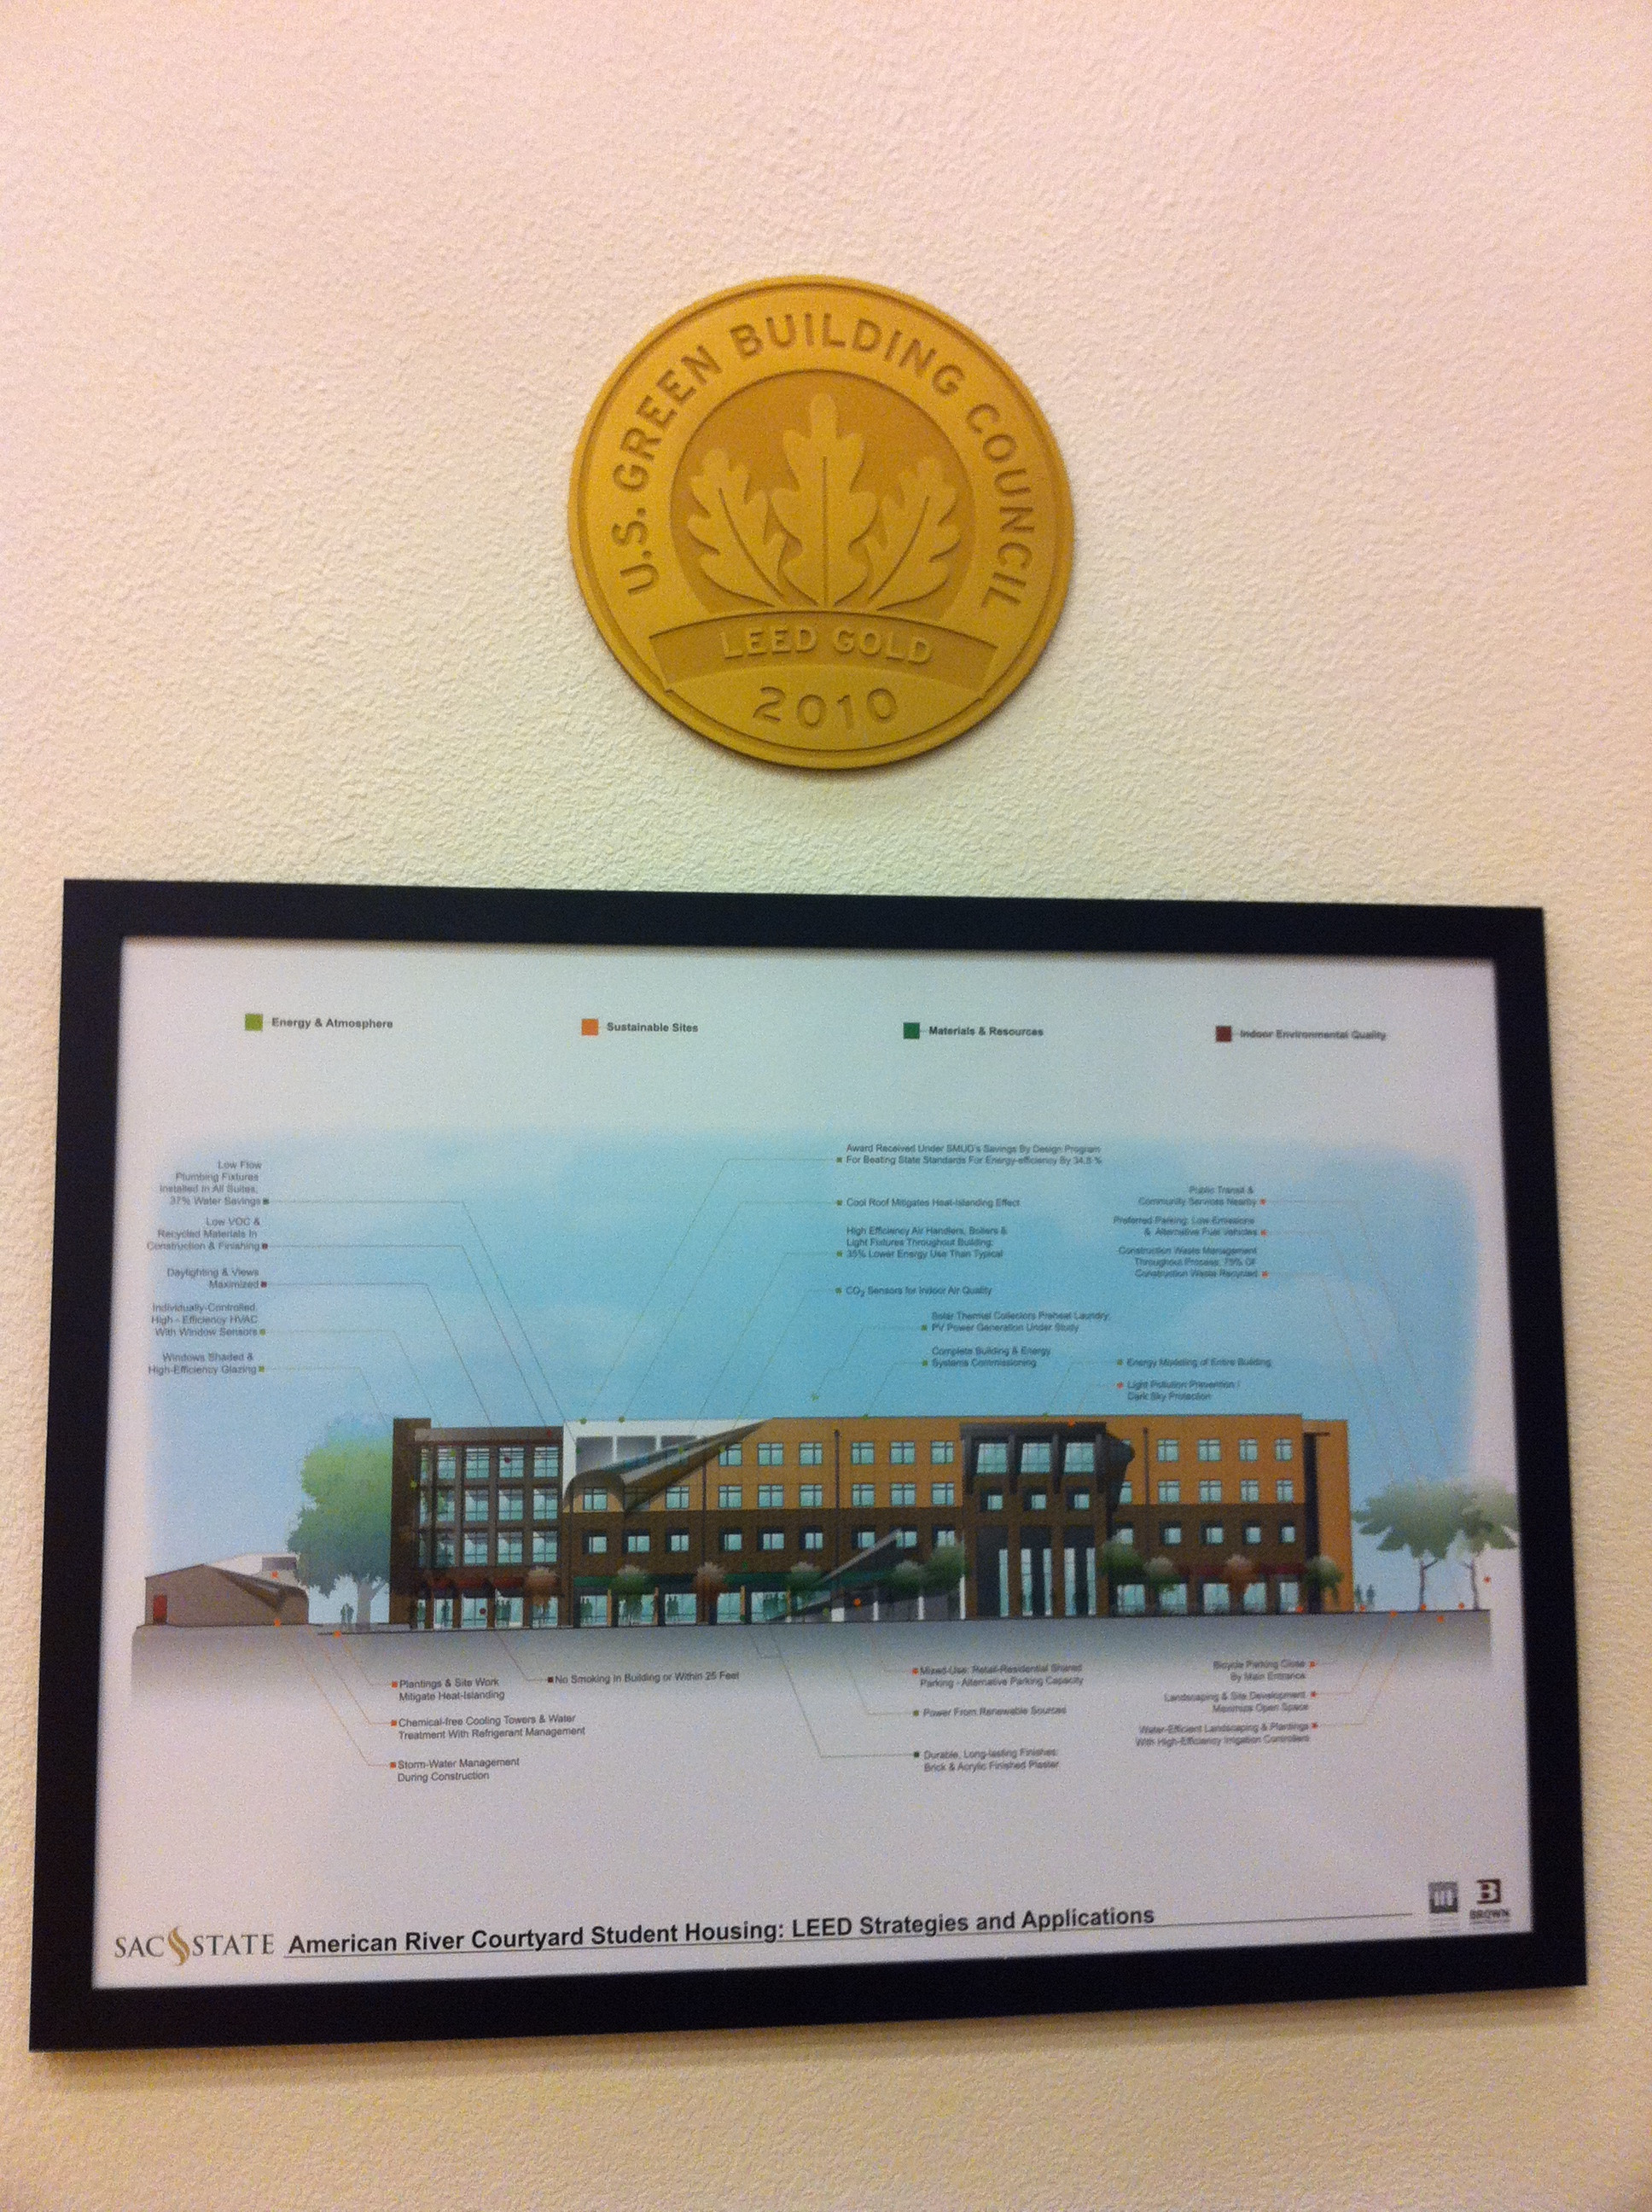 Old work - LEED interpretive plaque for a student housing project I helped design (2 years into that building design between myself and five other team members) - along with the LEED medallion!